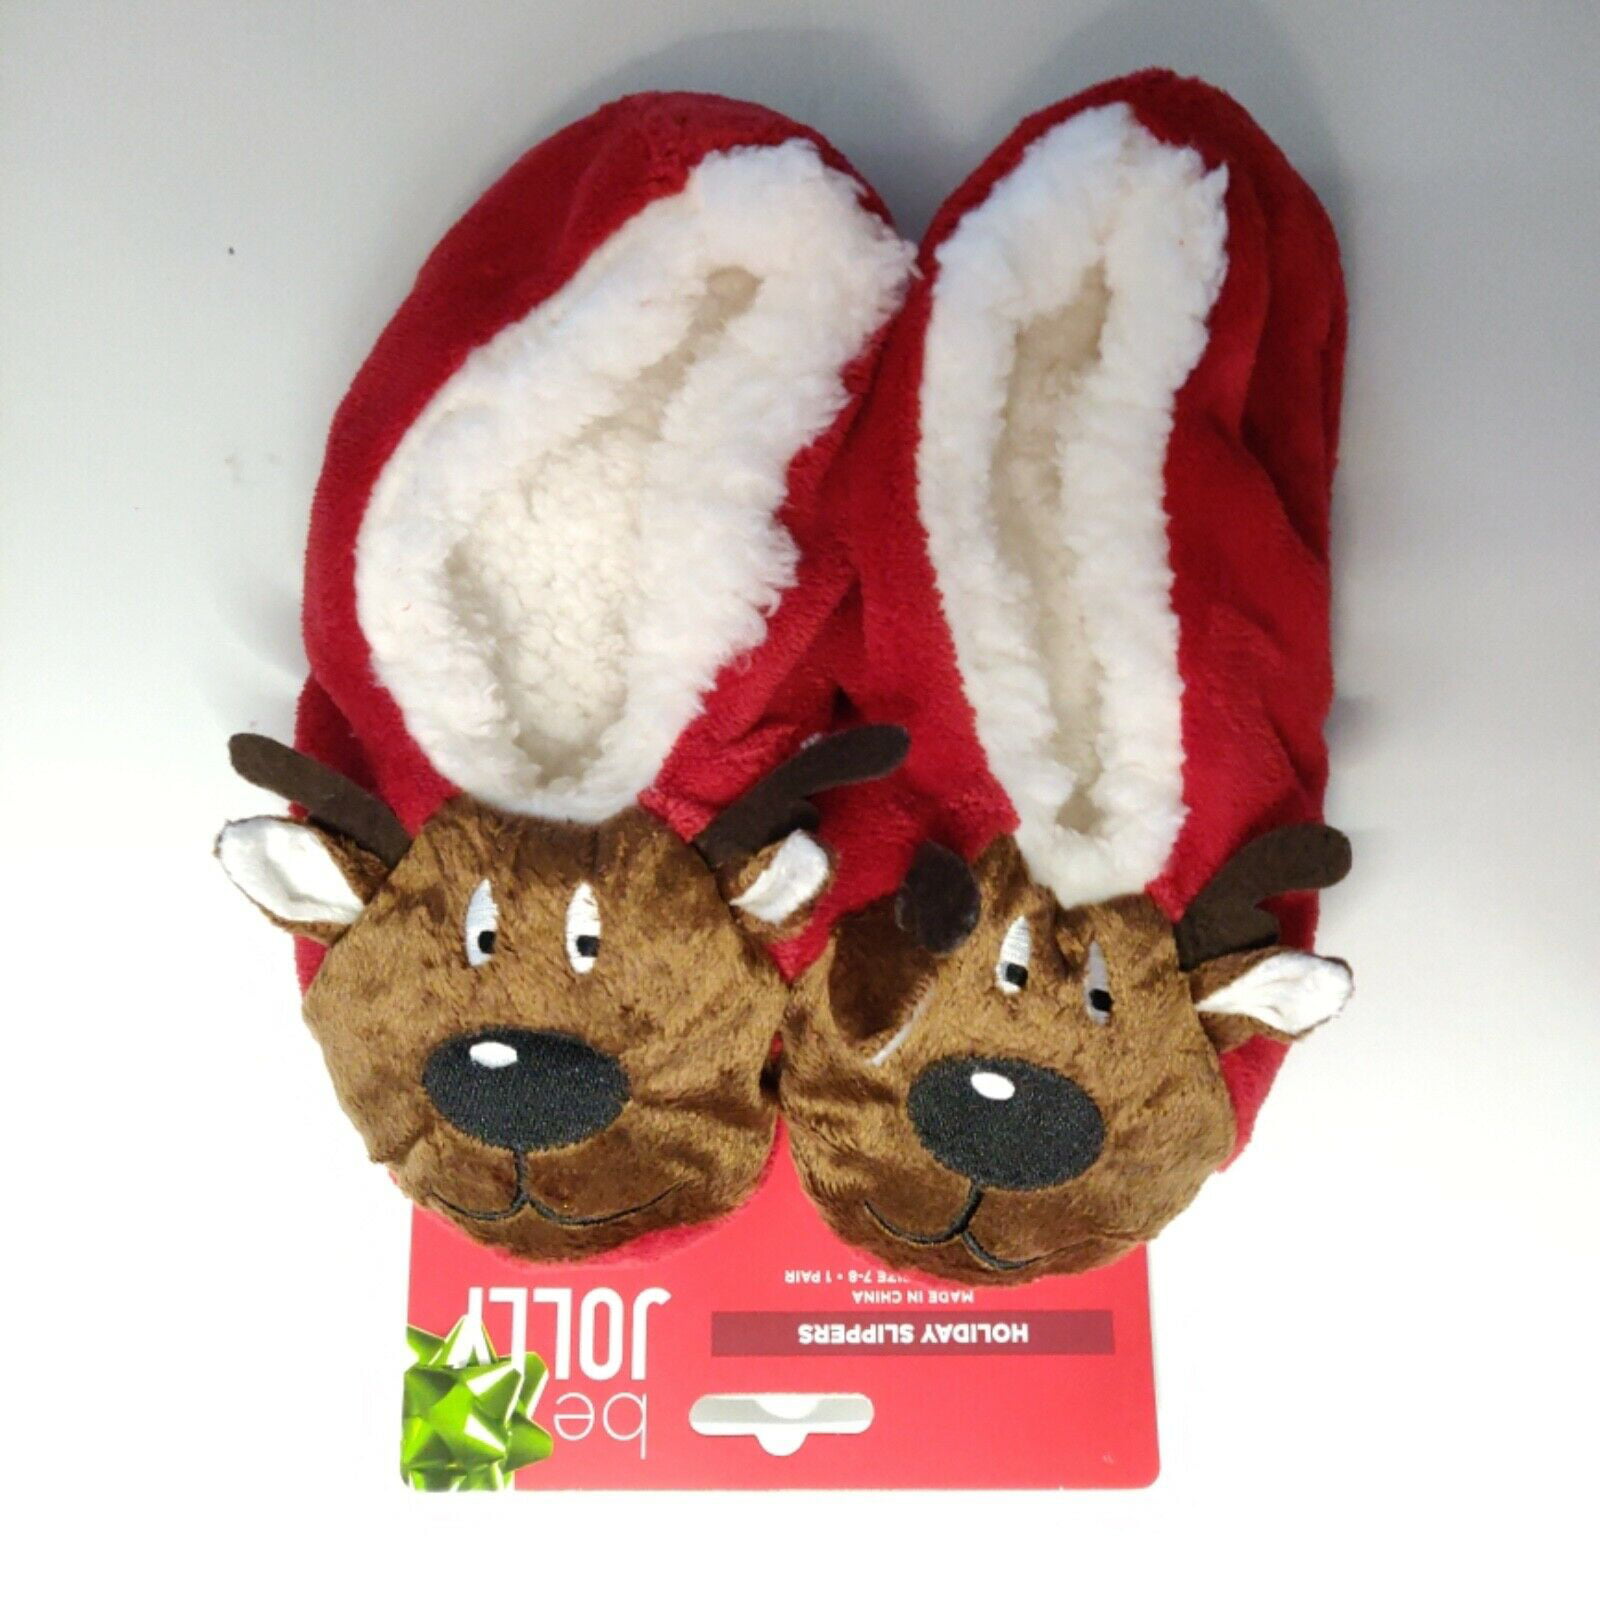 Plush Christmas Reindeer Heat Pack Slippers Gift/Present Unisex One Size